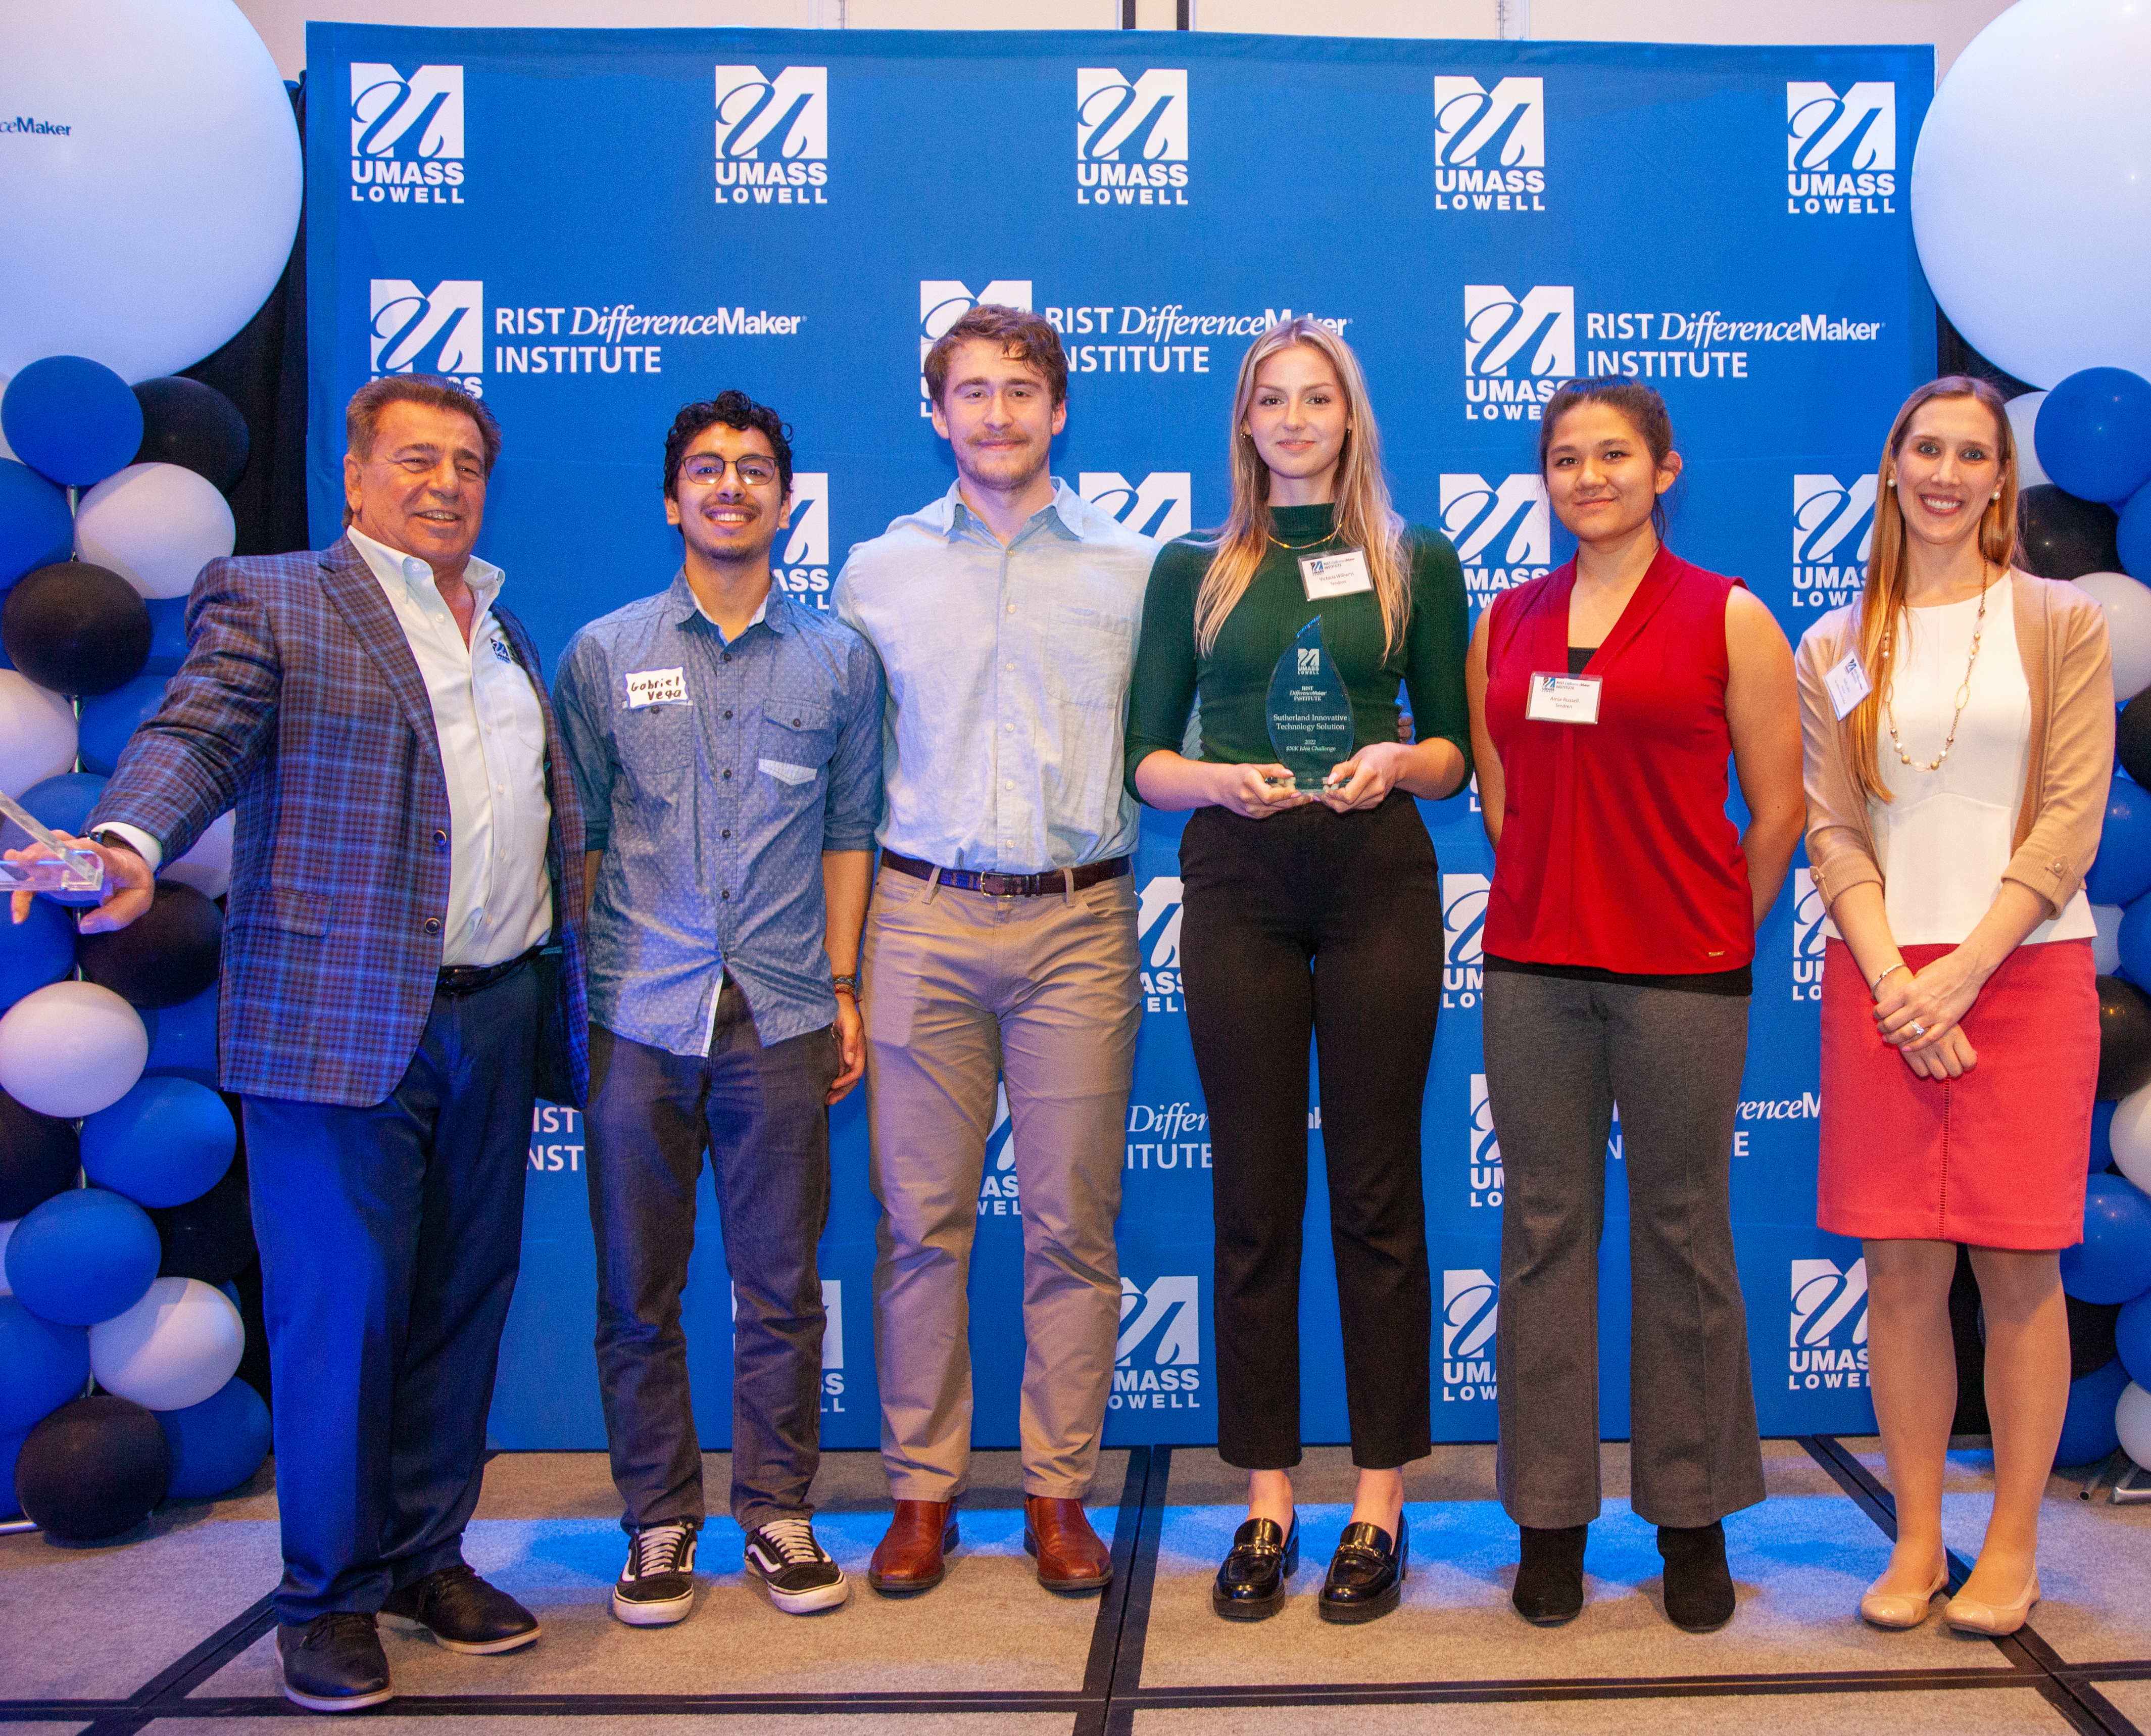 2 female and 2 male students from the Tendren team holding an award pose with Brian Rist and Holly Lalos of Difference Makers against a blue UMass Lowell backdrop.